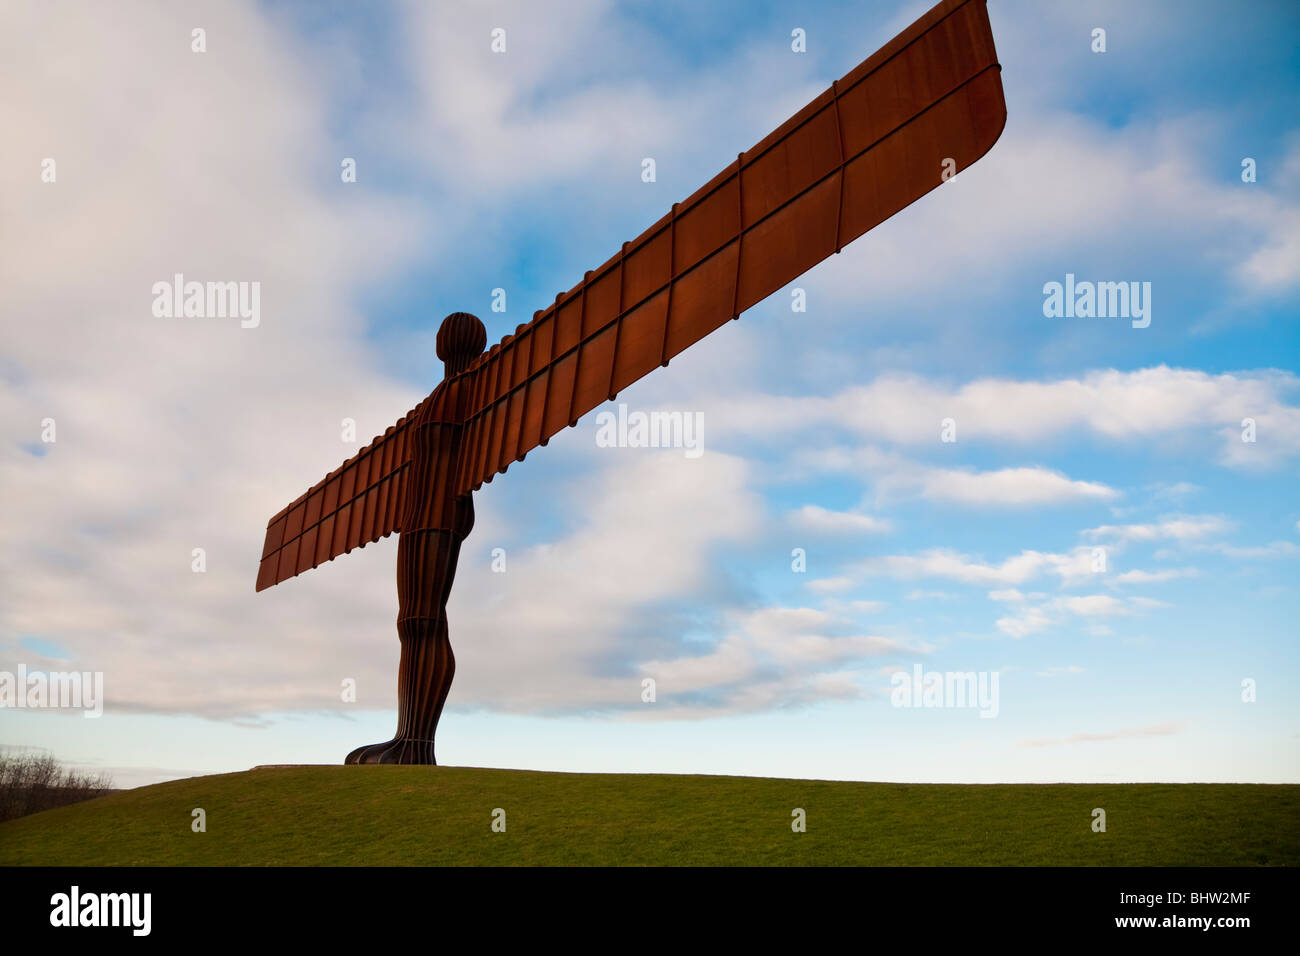 Sculpture on grass with sky 'Angel of the North' Newcastle Northumberland England UK Stock Photo